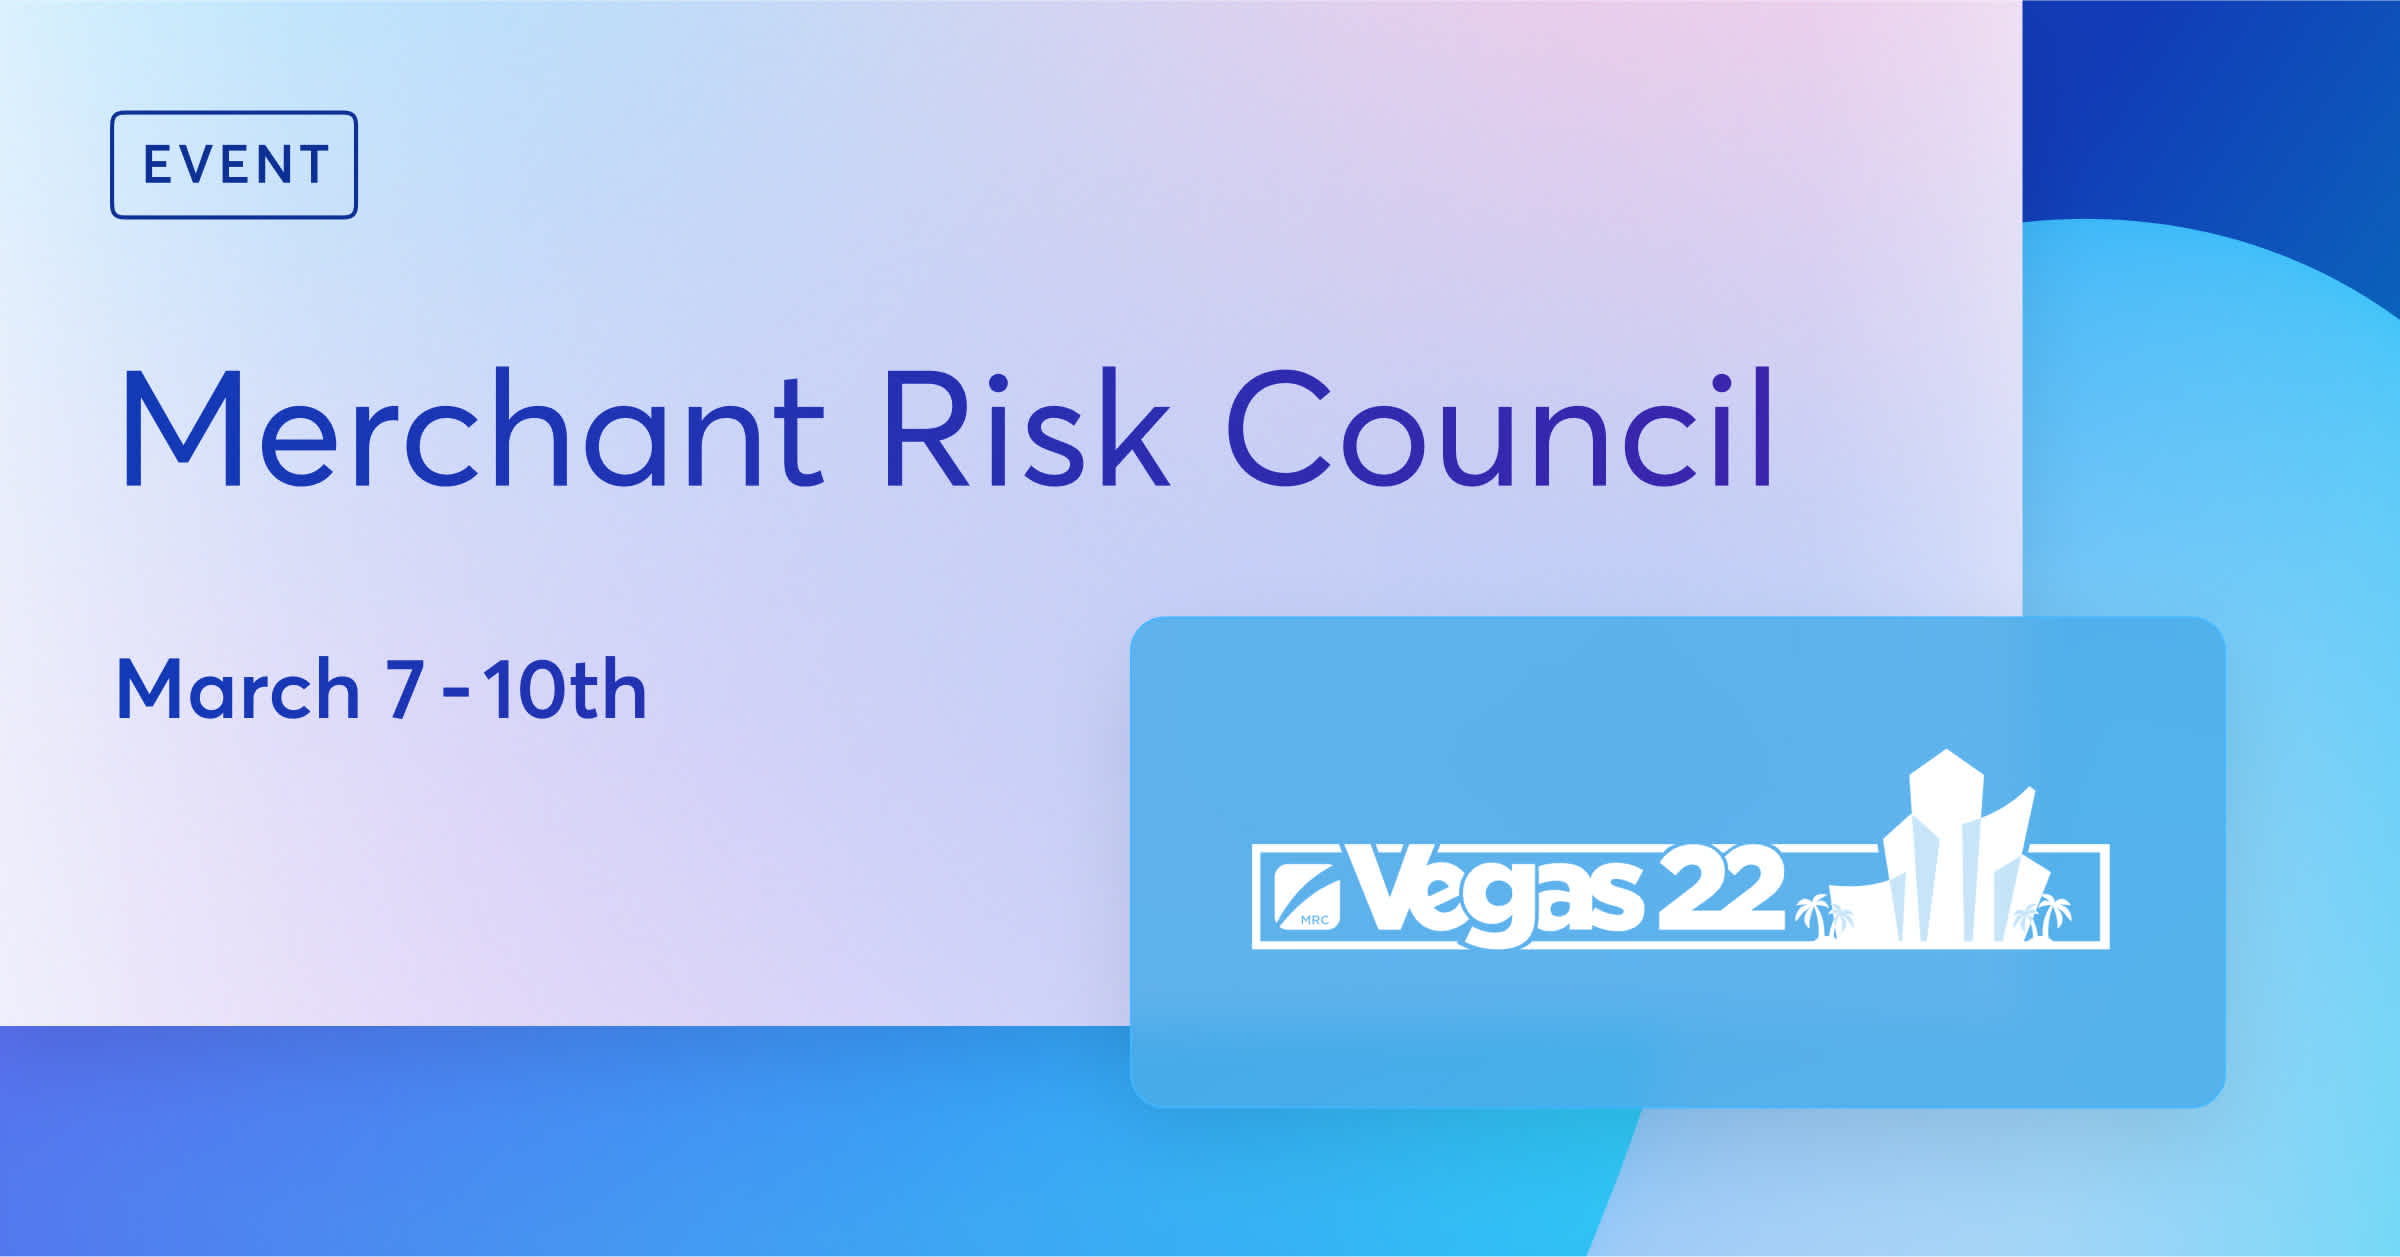 We're headed to the Merchant Risk Council in March